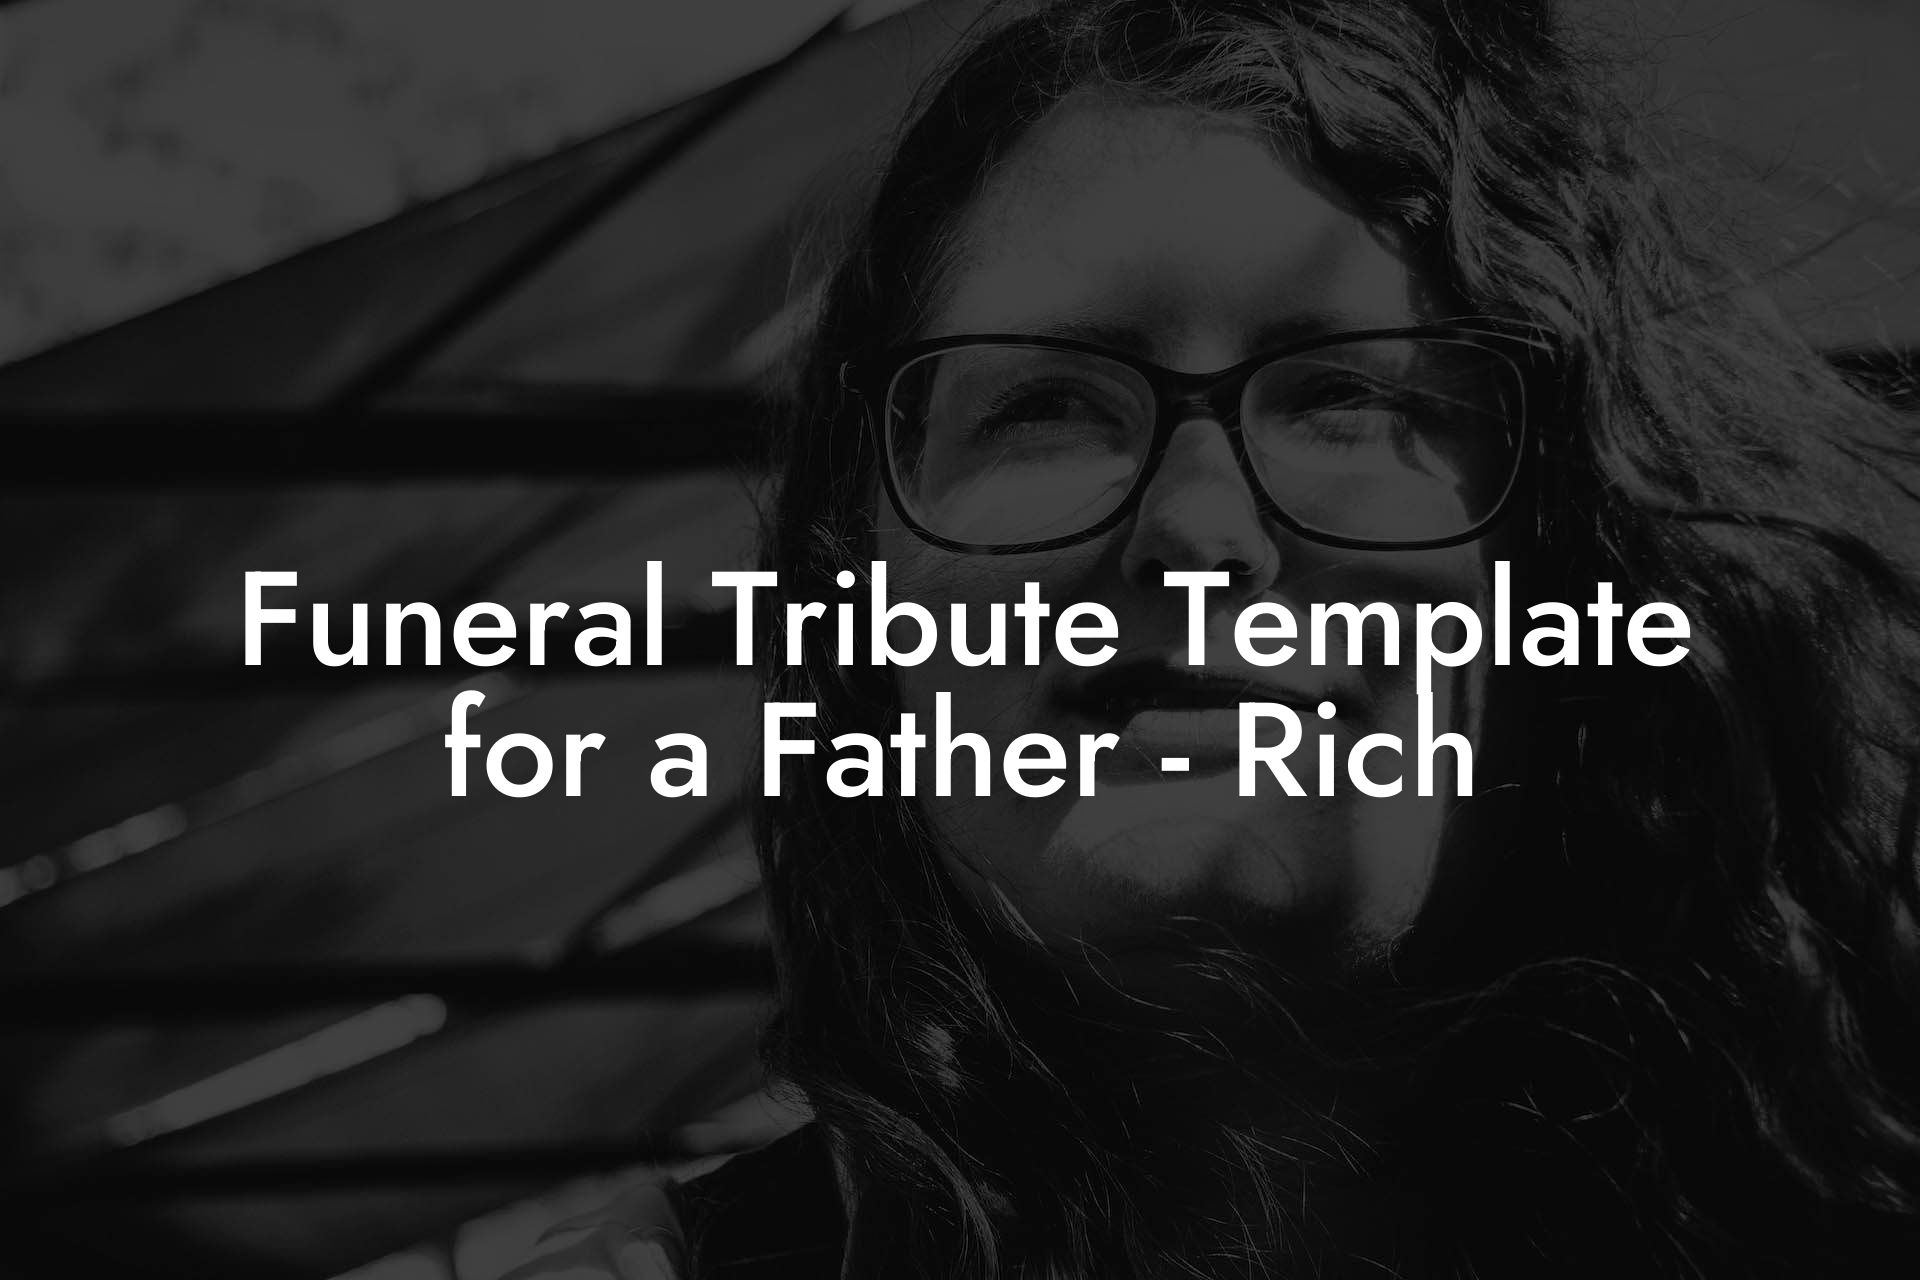 Funeral Tribute Template for a Father - Rich